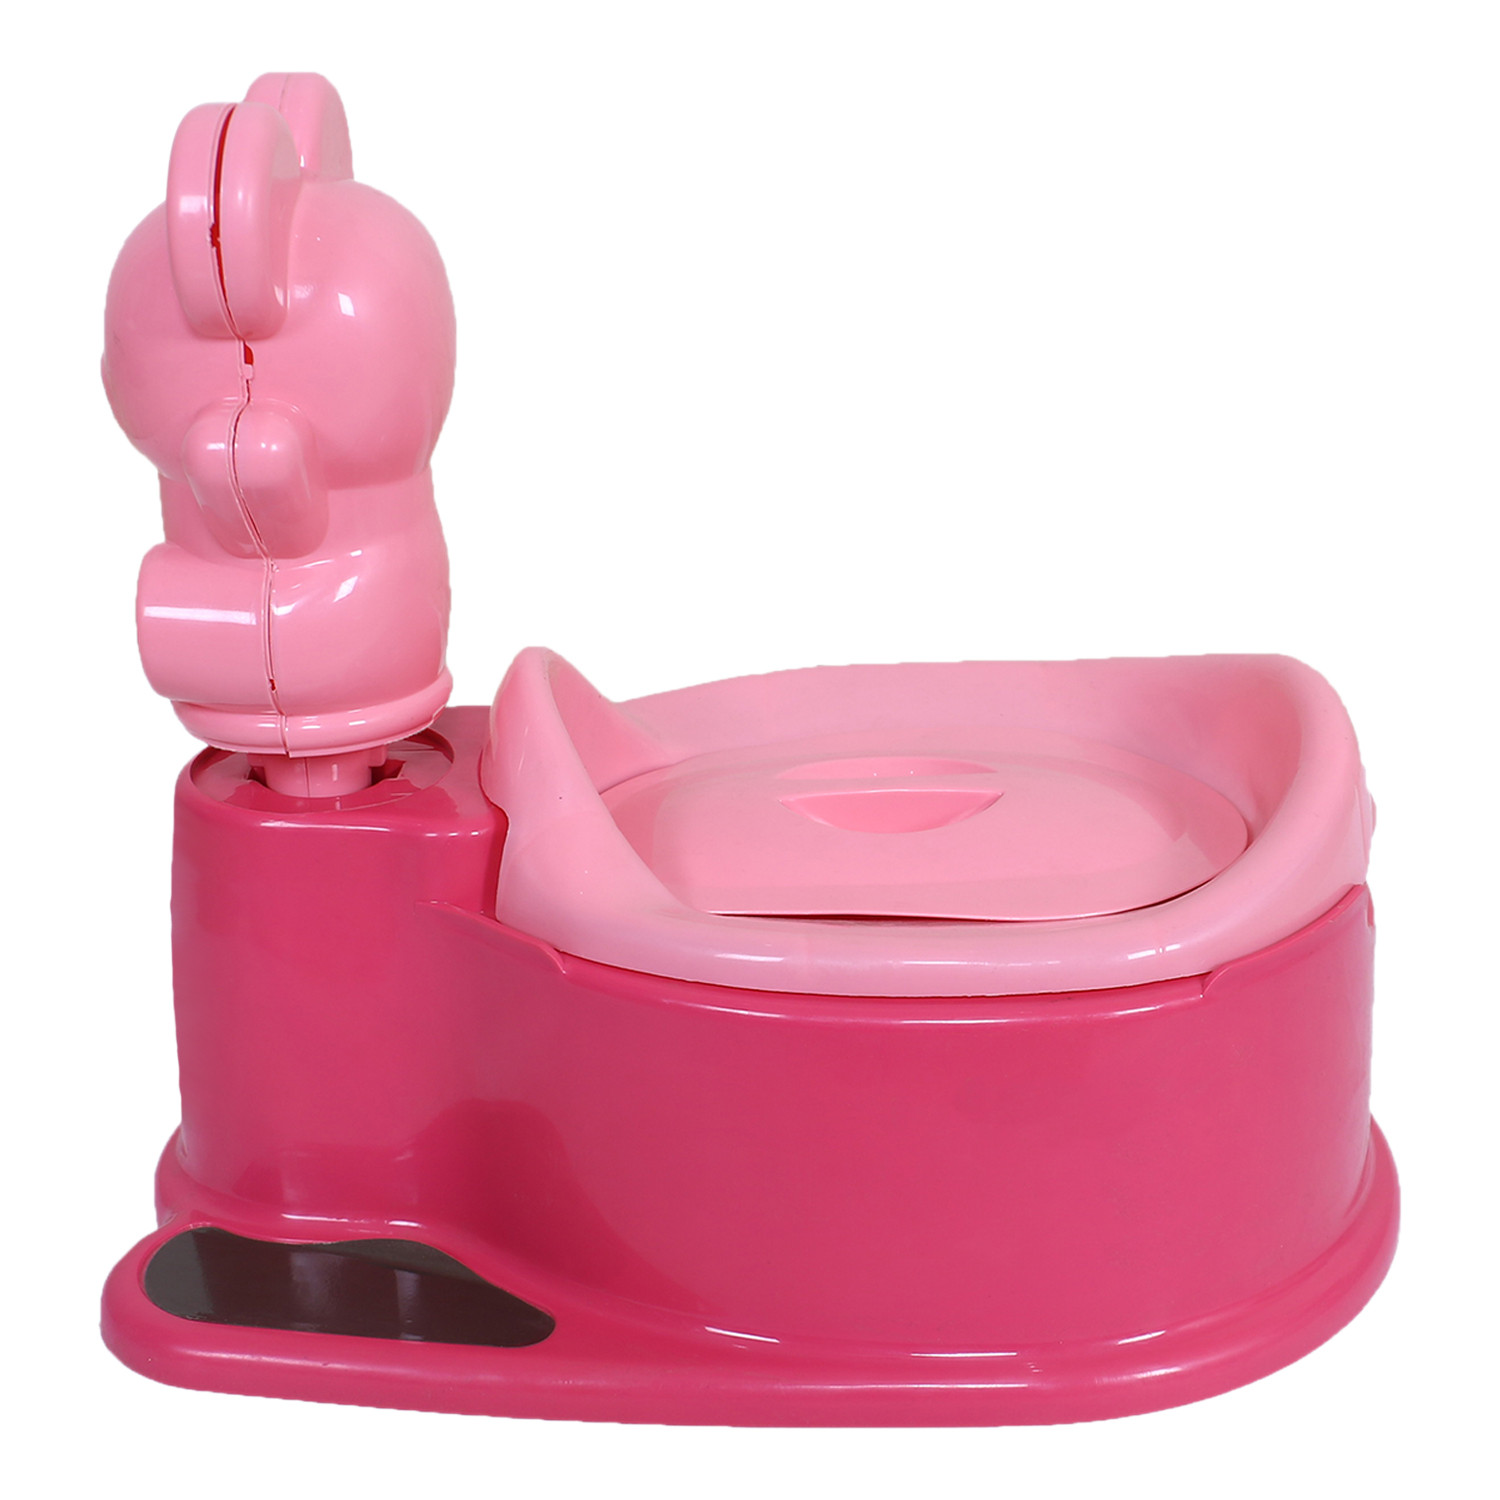 Kuber Industries Potty Training Seat|Portable Baby Potty Seat|Kids Potty Seat|Potty Seat For 1 + Year Child|PINK